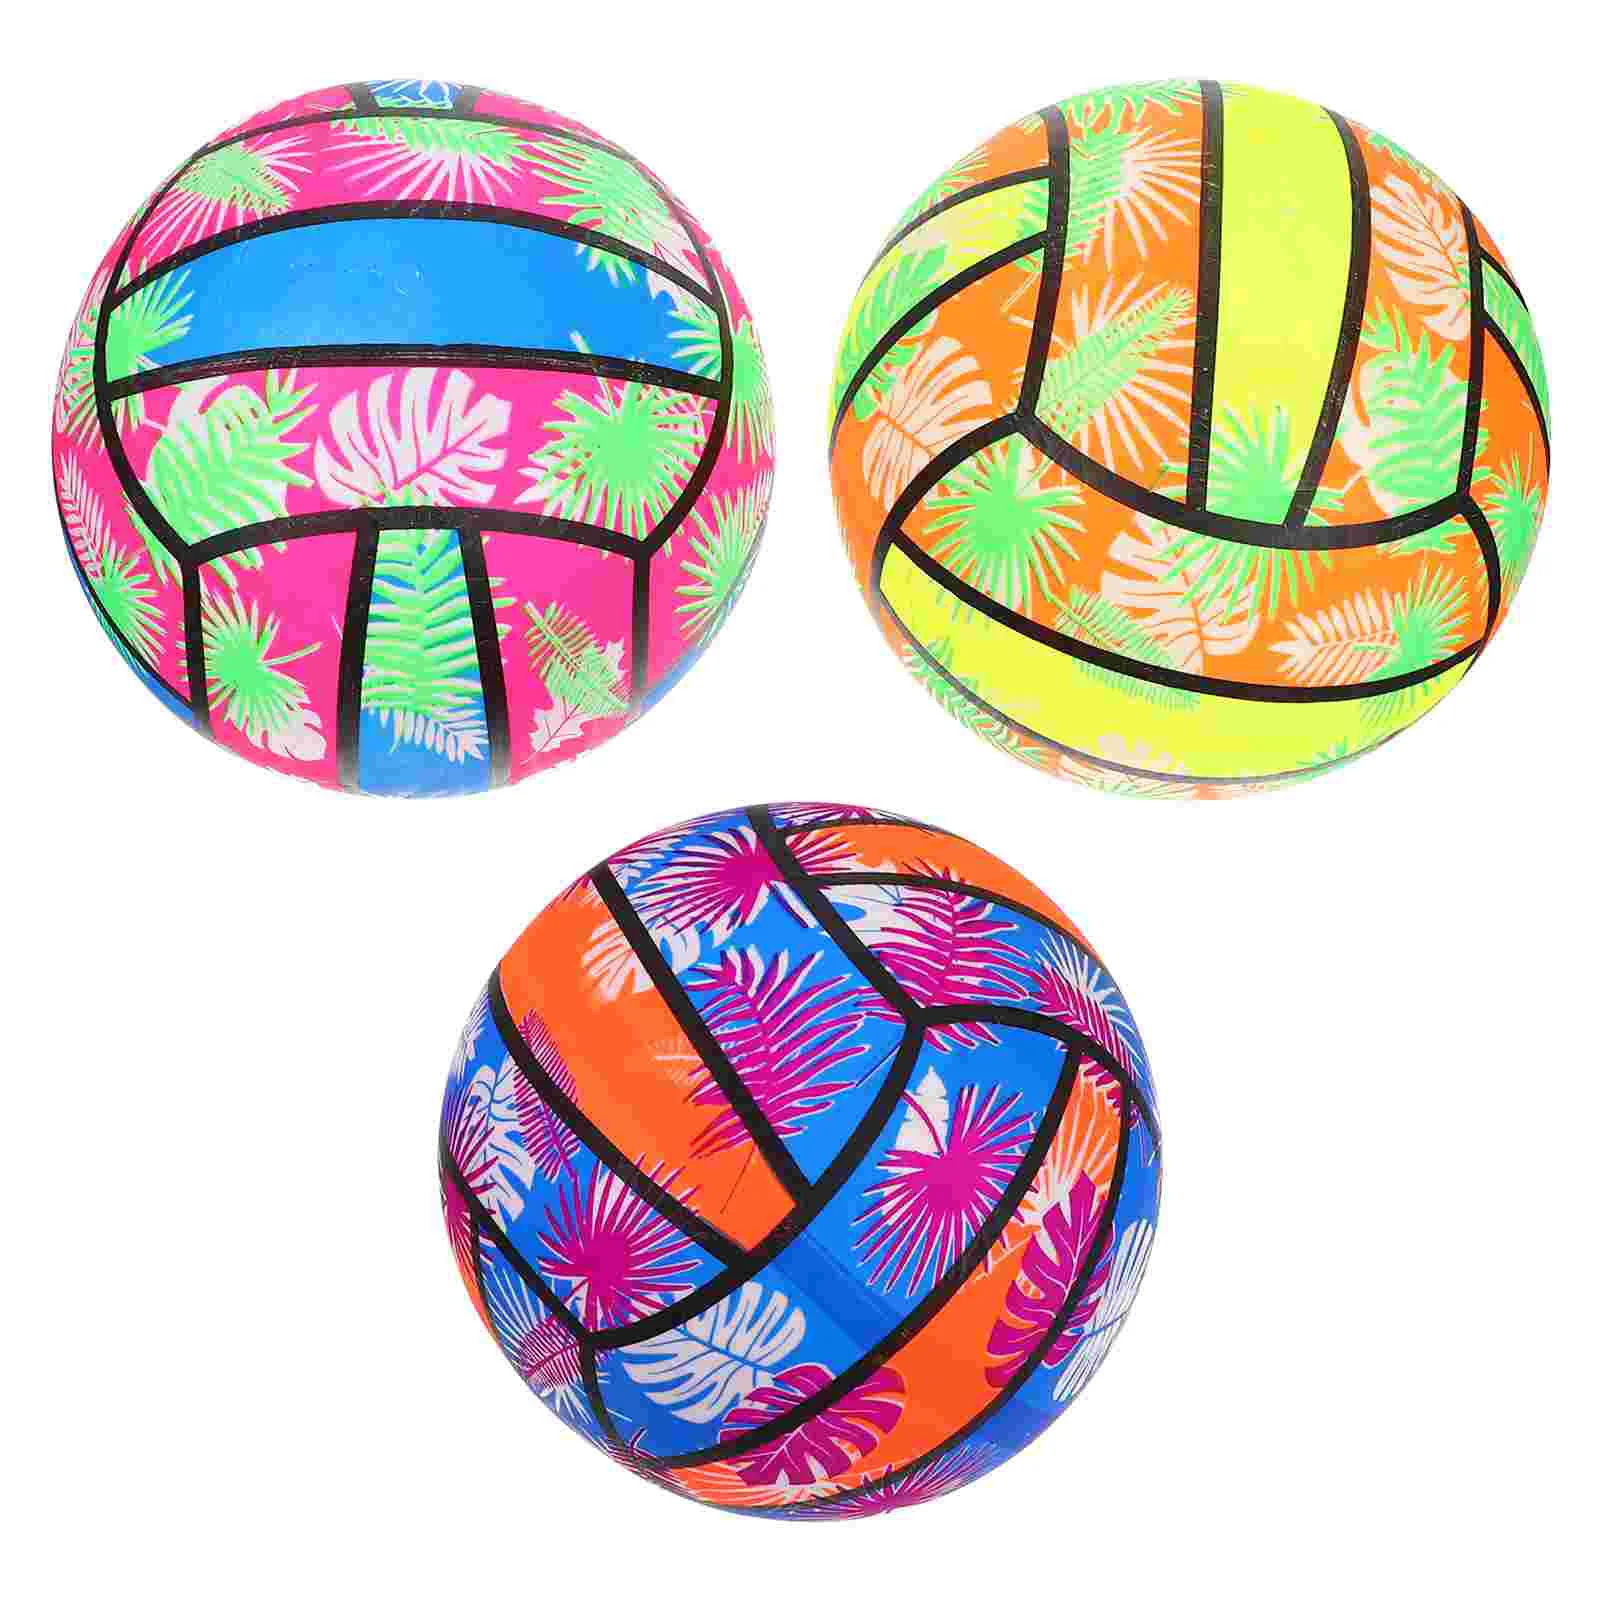 

3 Pcs Kids Inflatable Pool The Ball Volleyball Toy Soft Balls Pvc Water Playing Beach Party